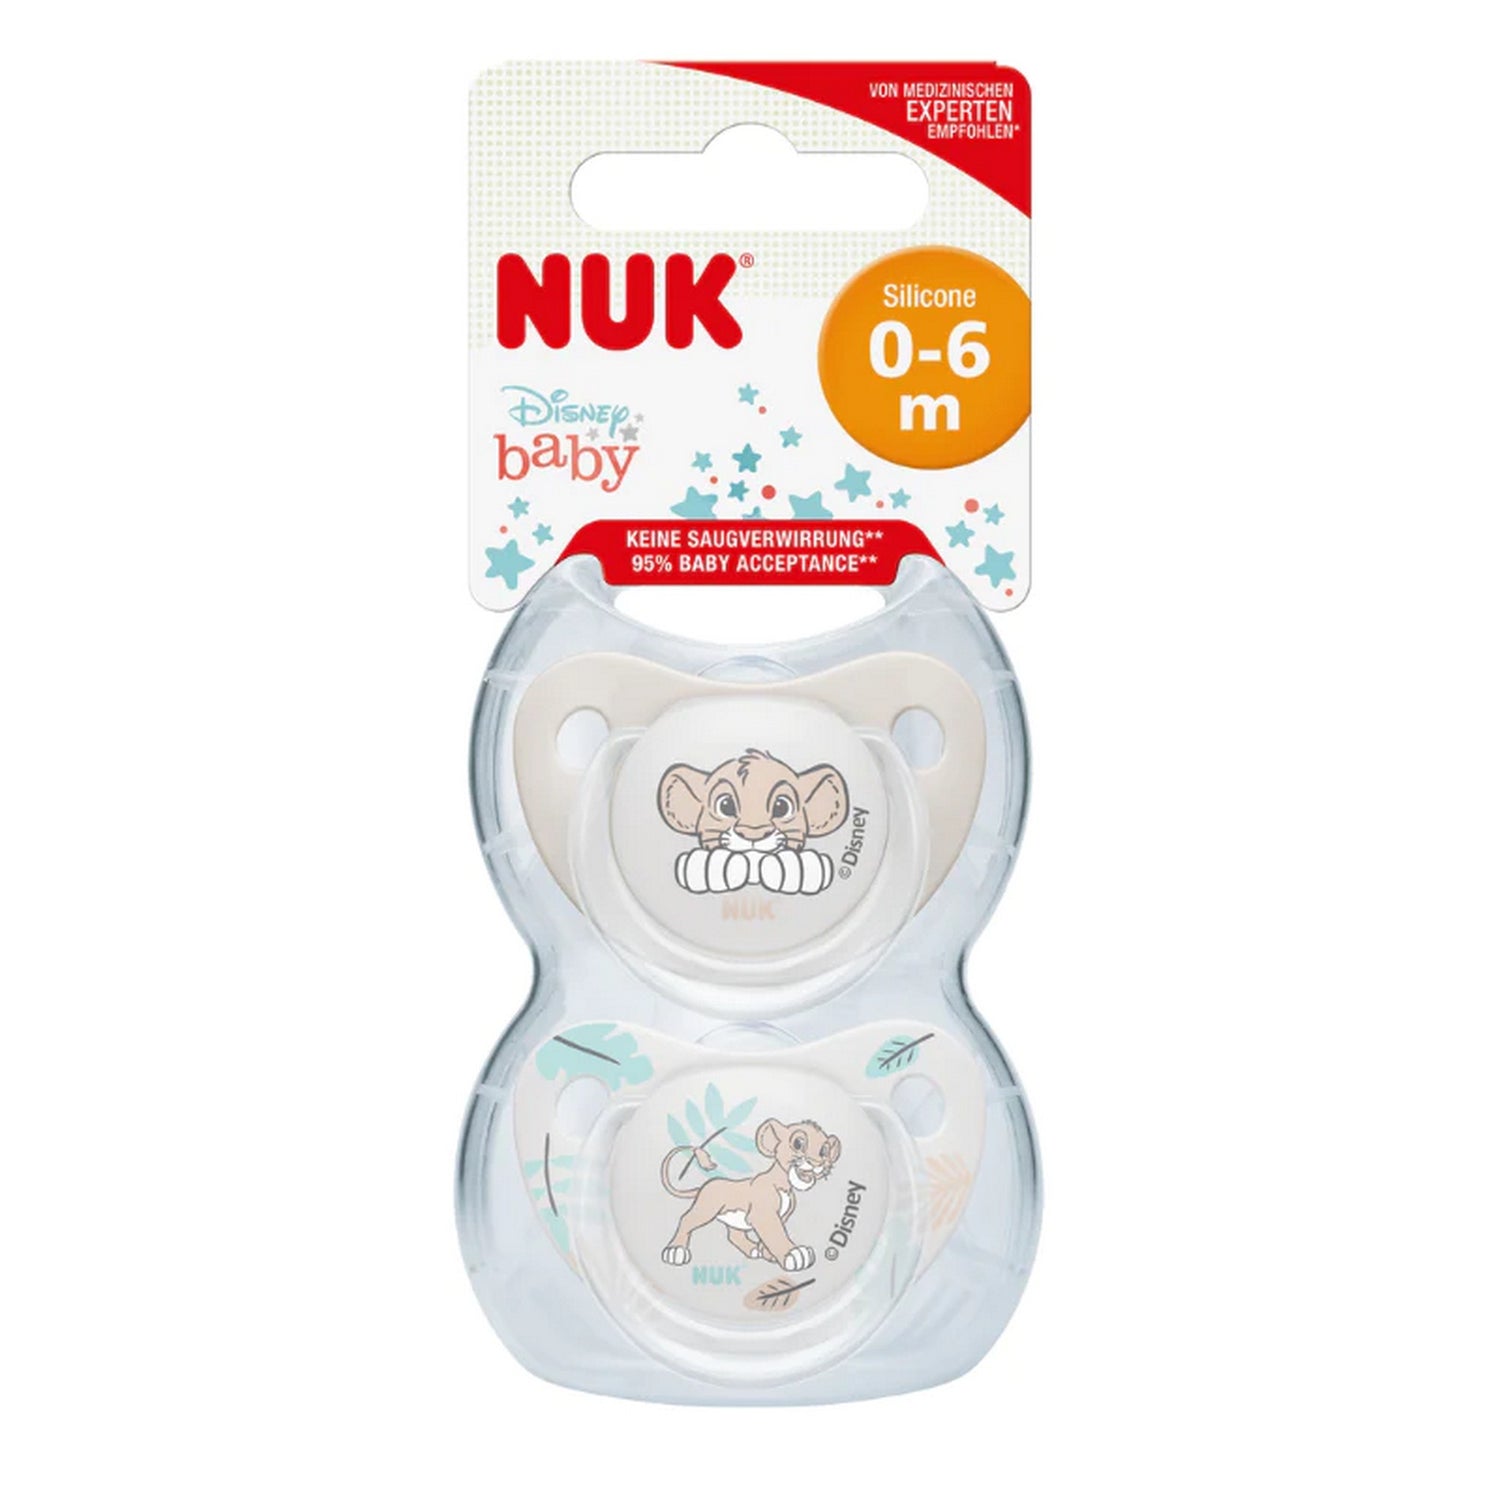 NUK Lion King Size 1 Soothers 2x